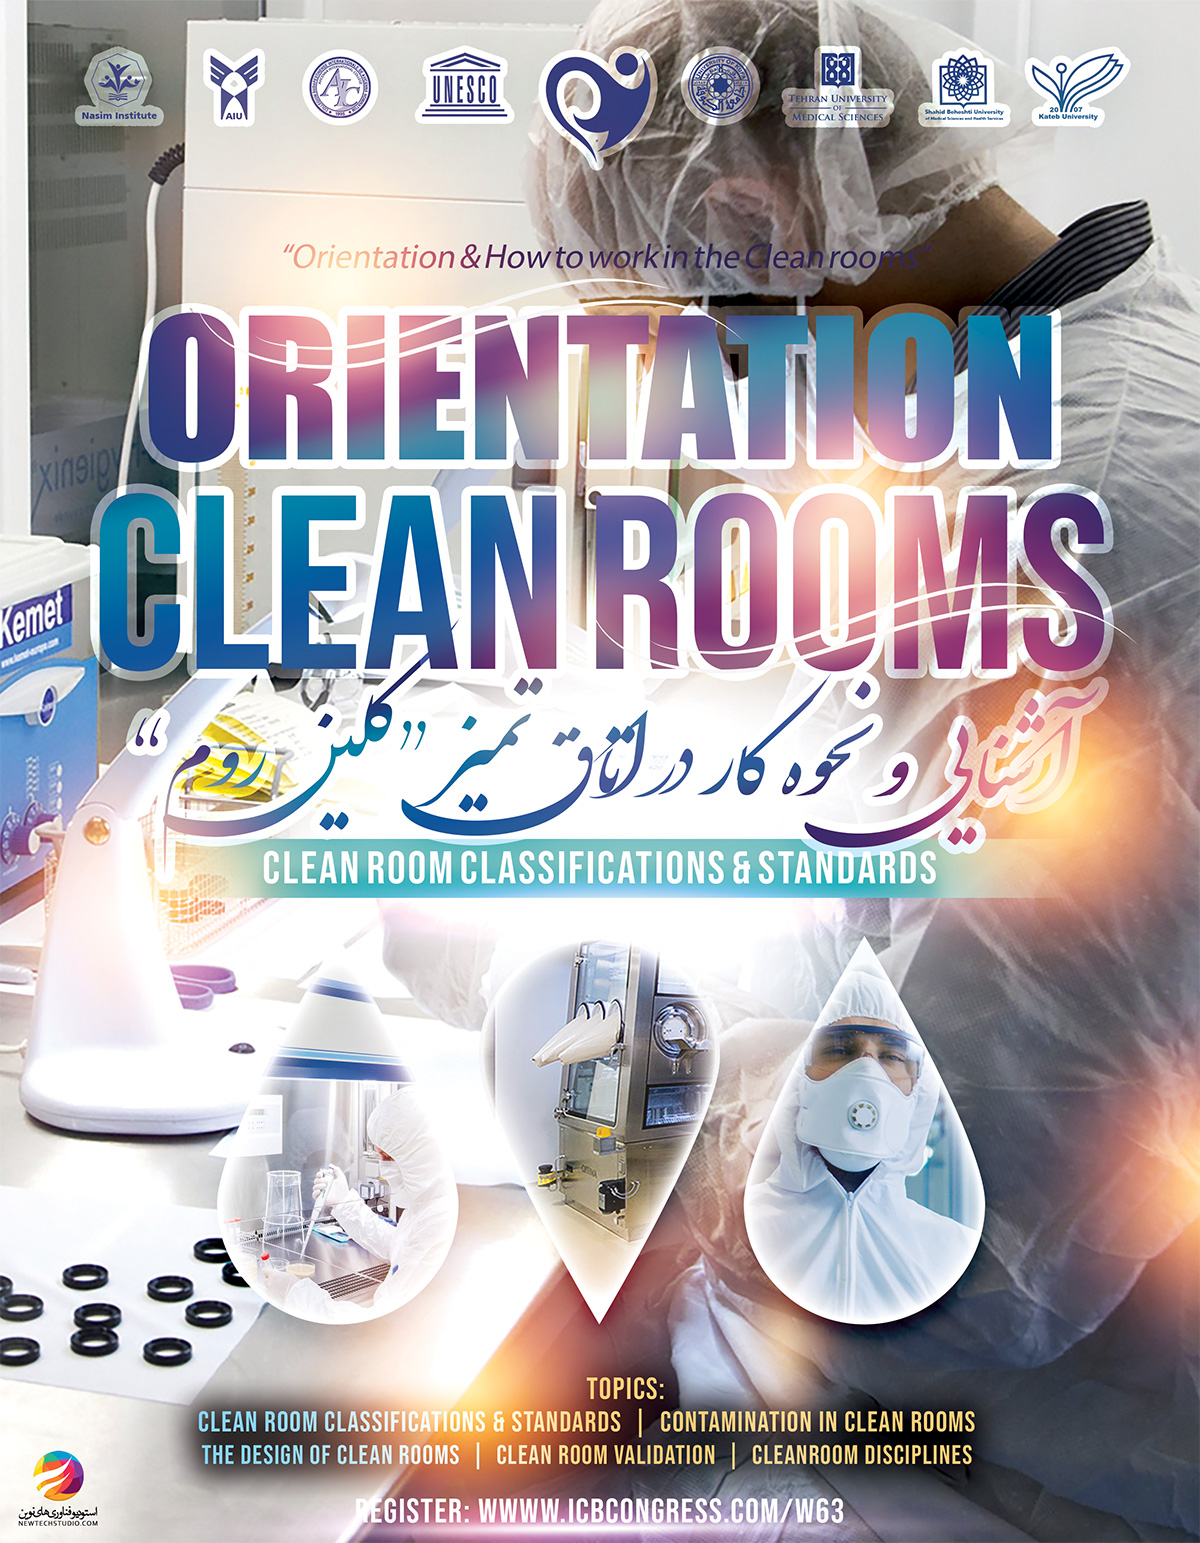 Orientation and How to work in the Clean rooms